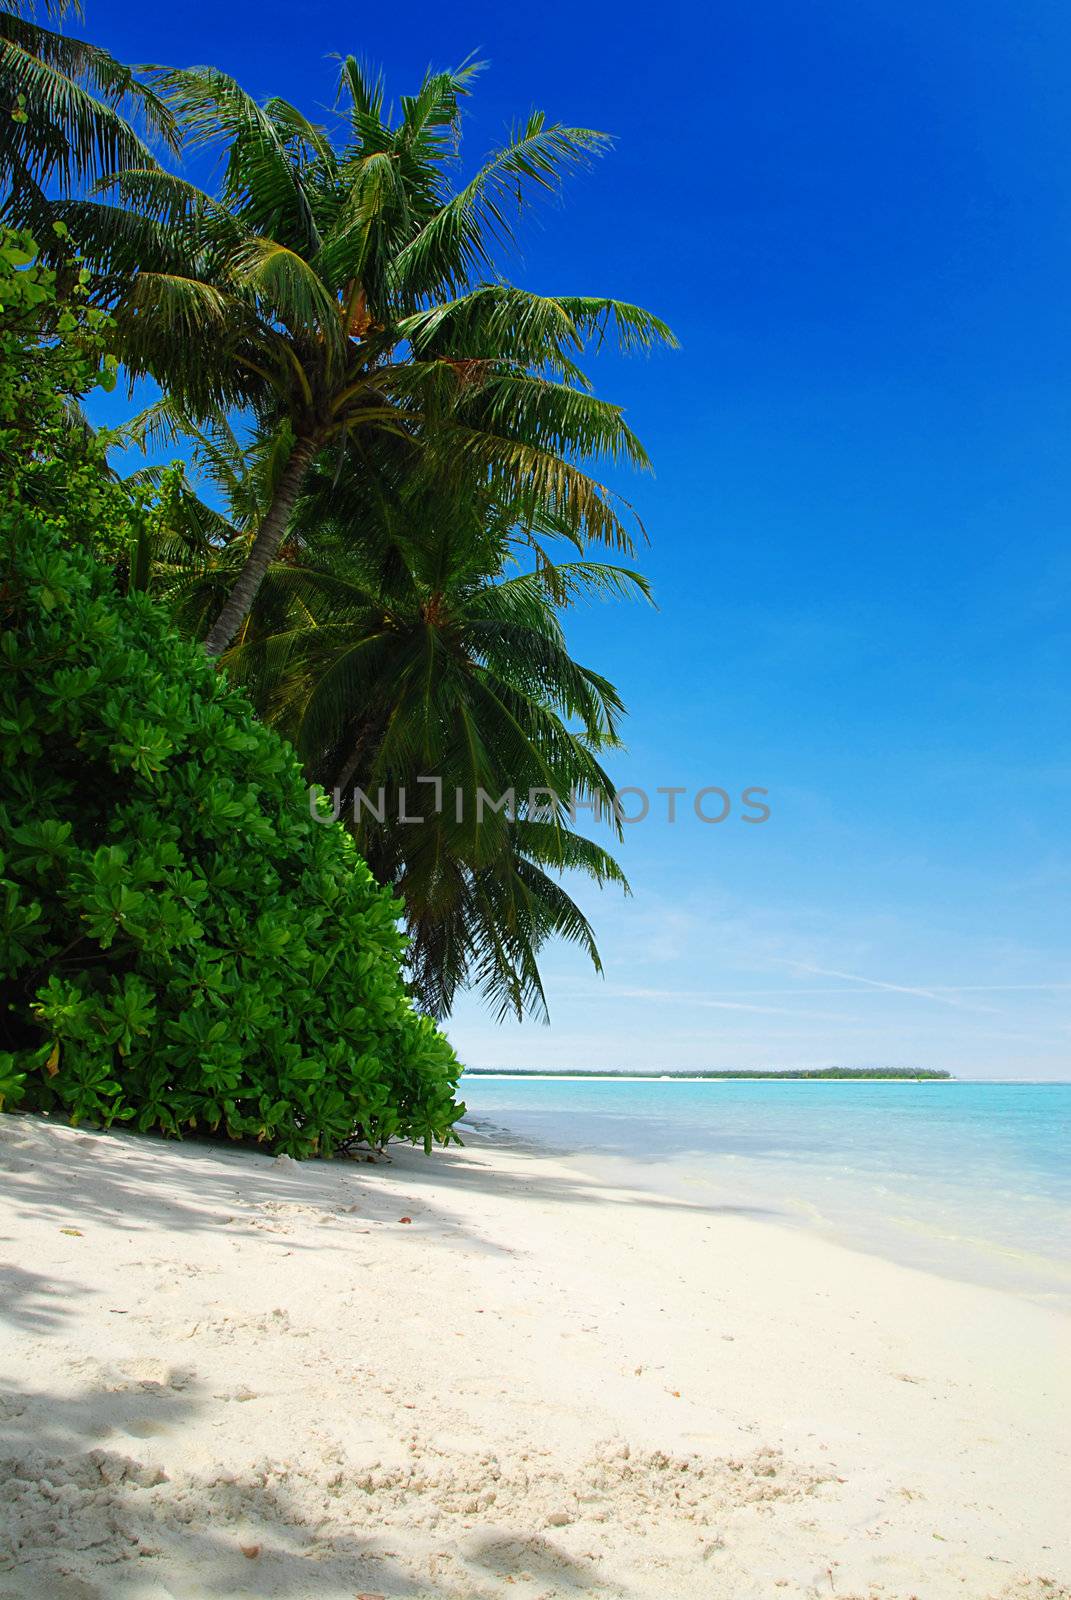 Beautiful tropical beach with turquoise sea, white sand and palm